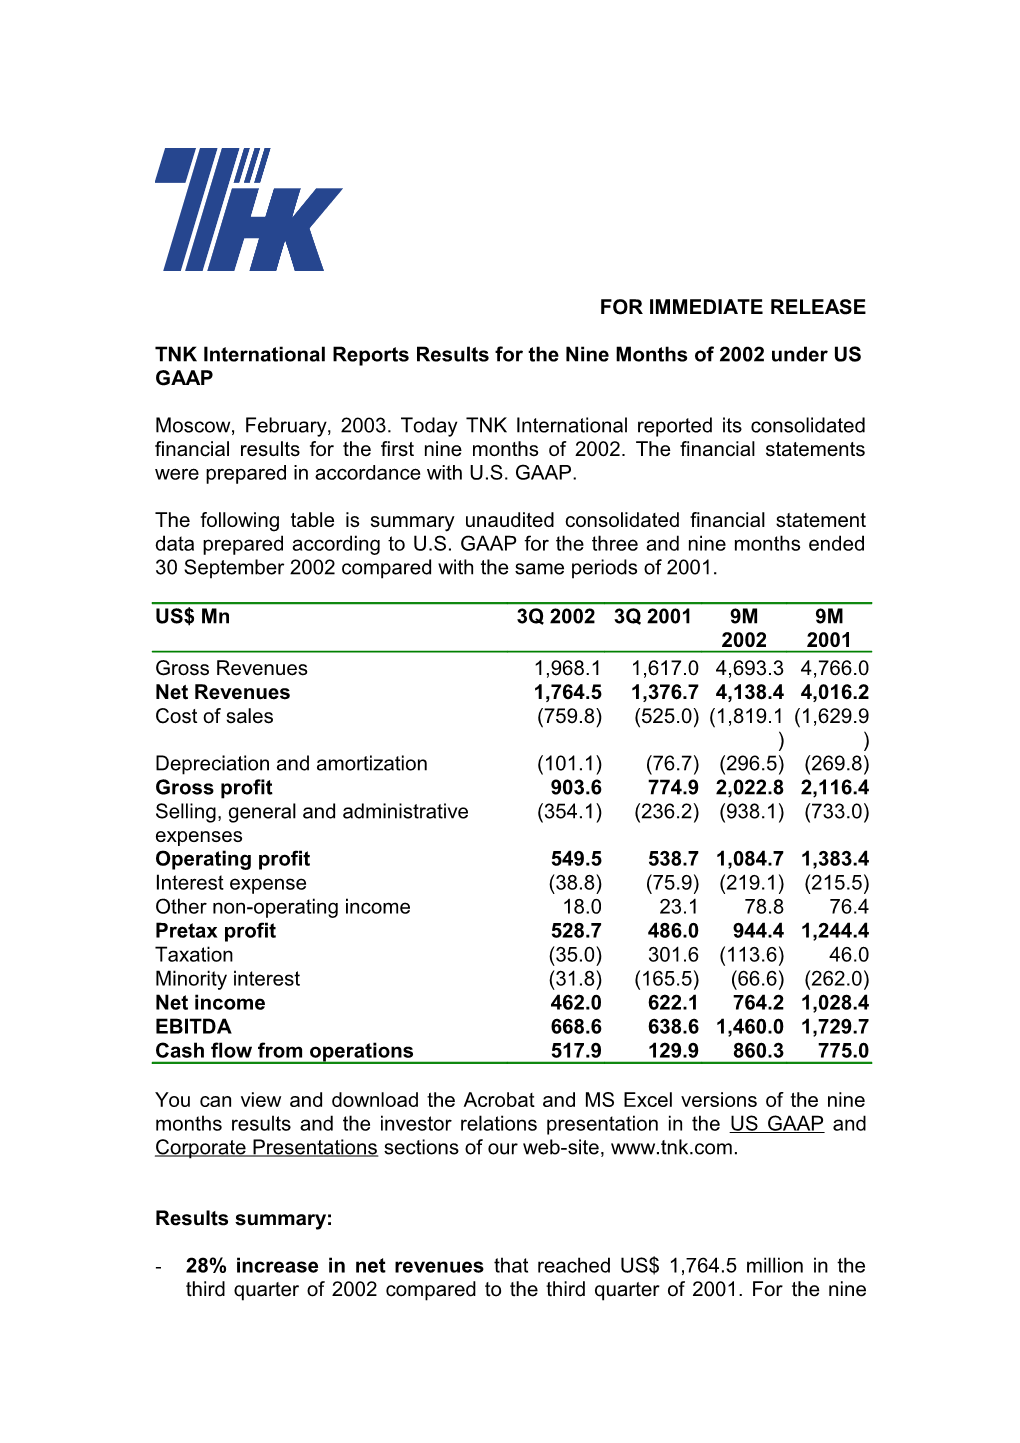 TNK International Reports Results for the Nine Months of 2002 Under US GAAP